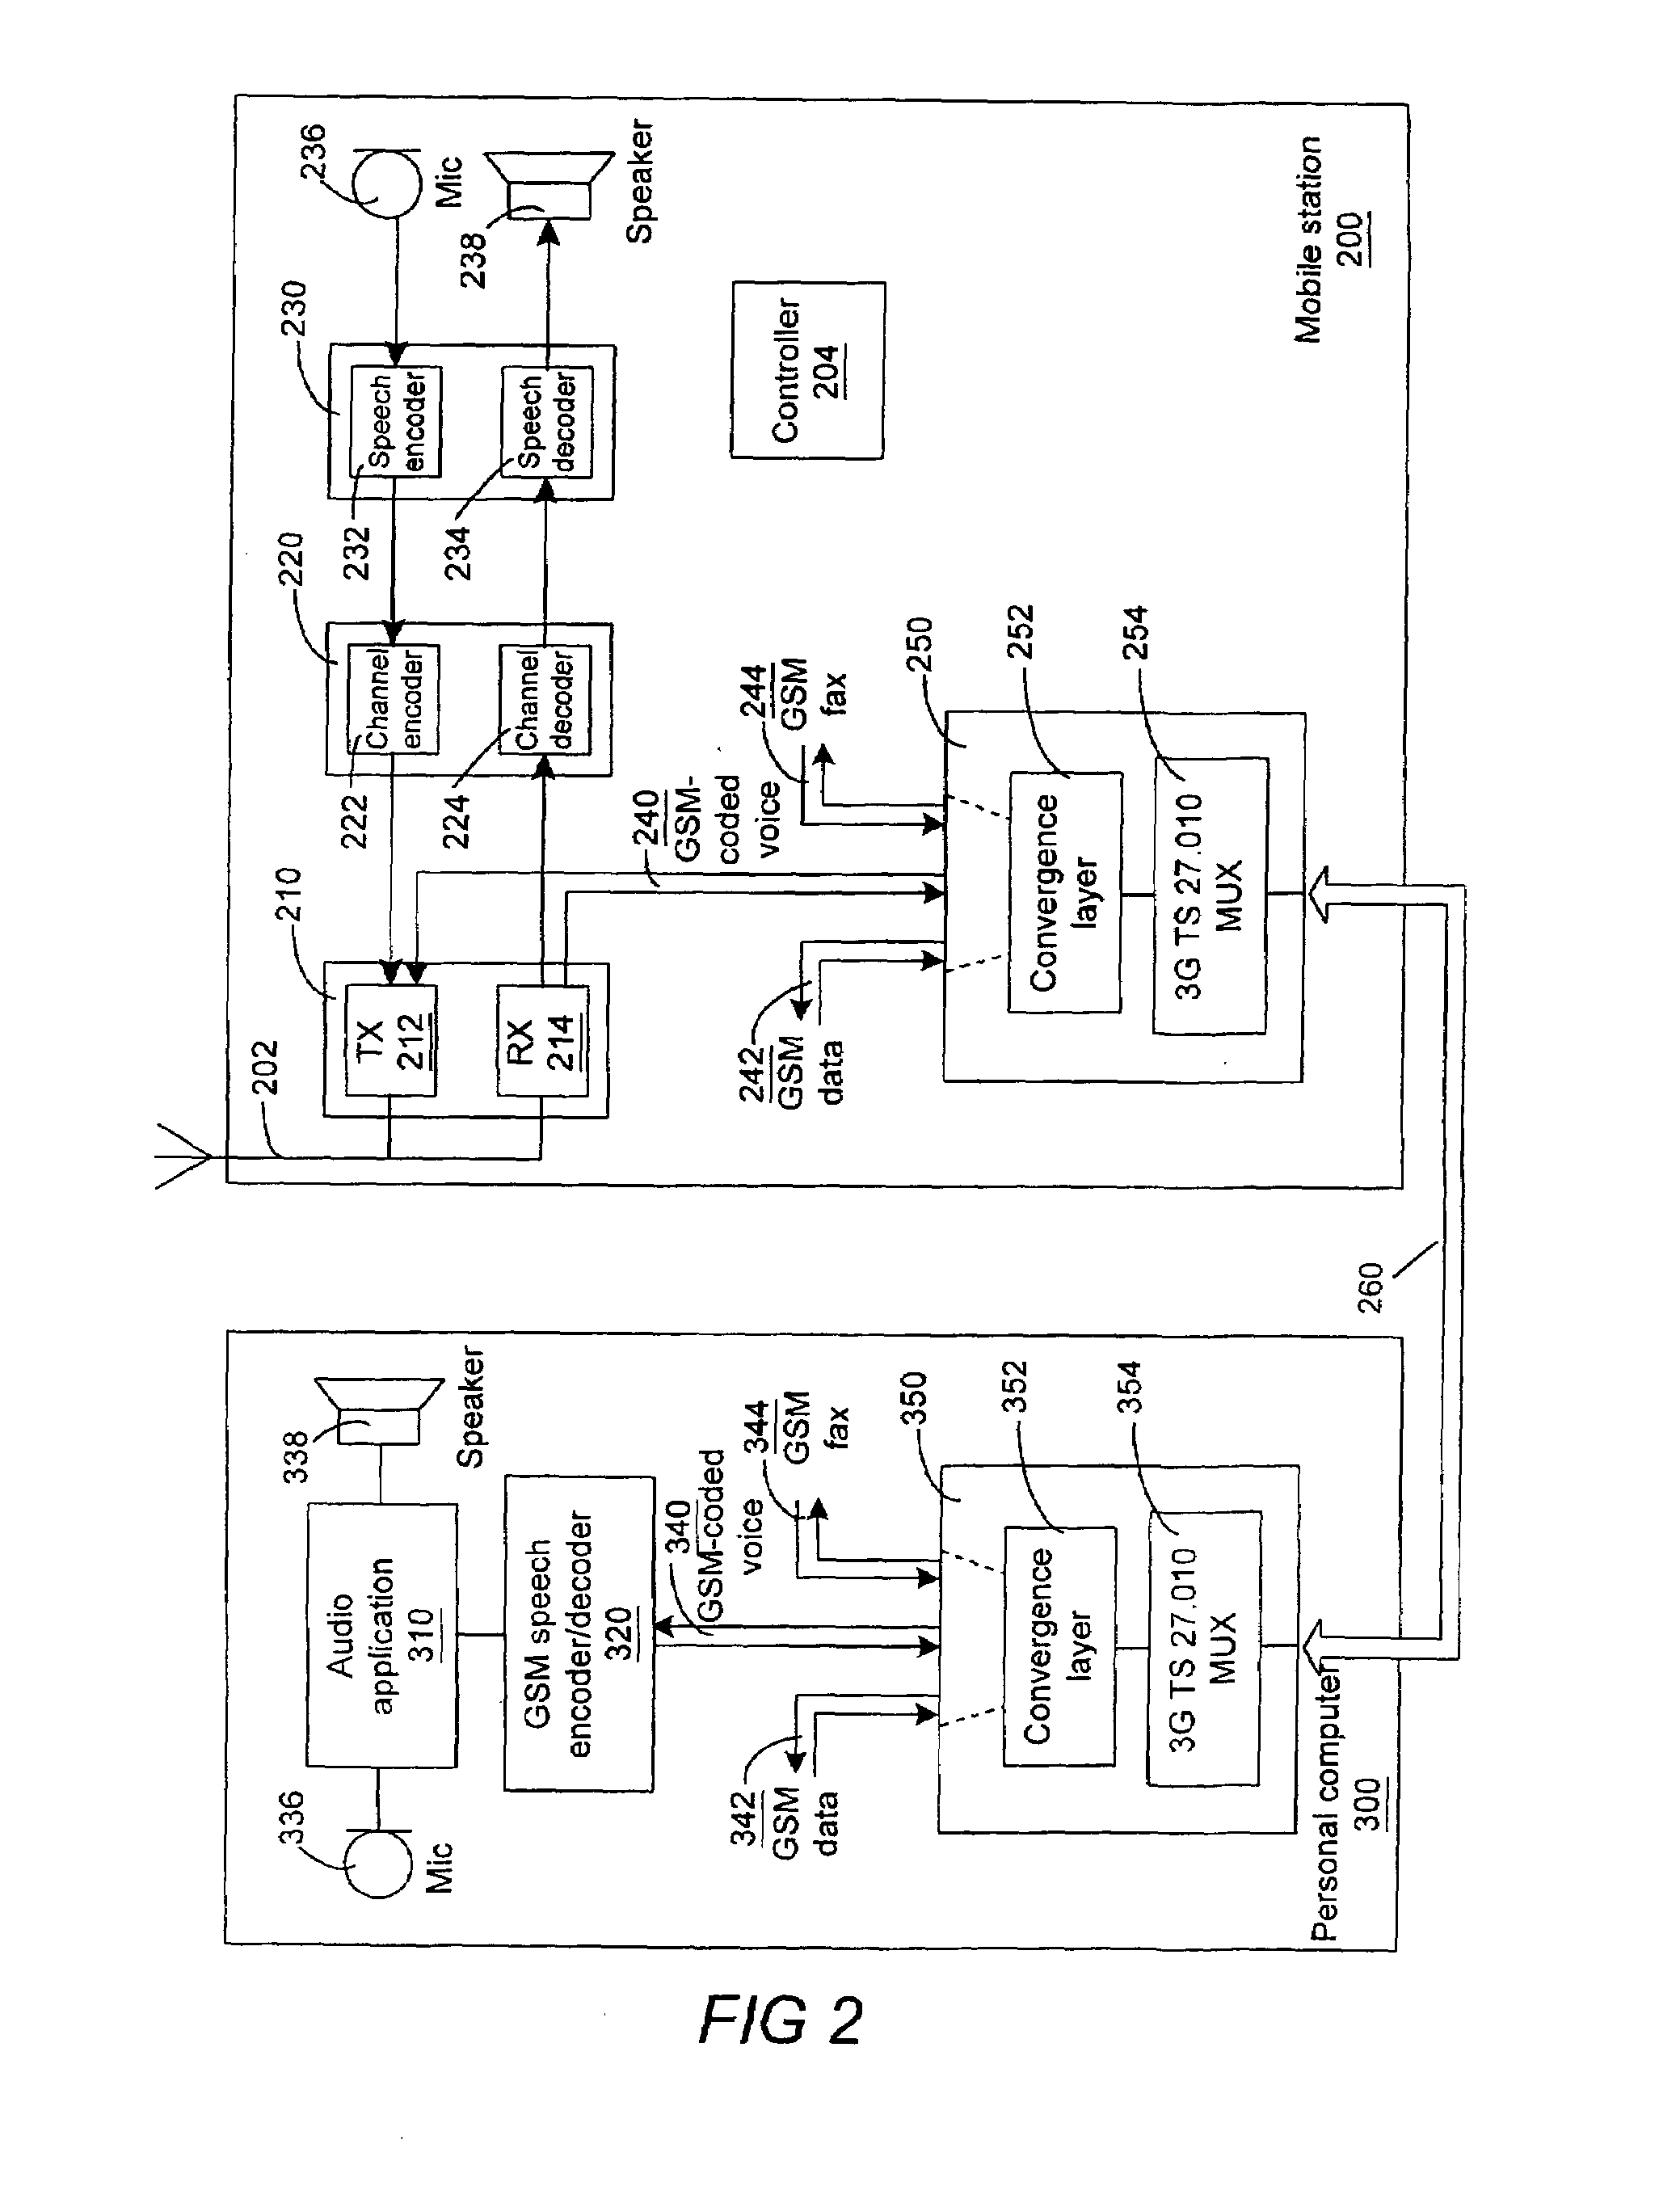 Voice communication between a portable communication apparatus and an external terminal